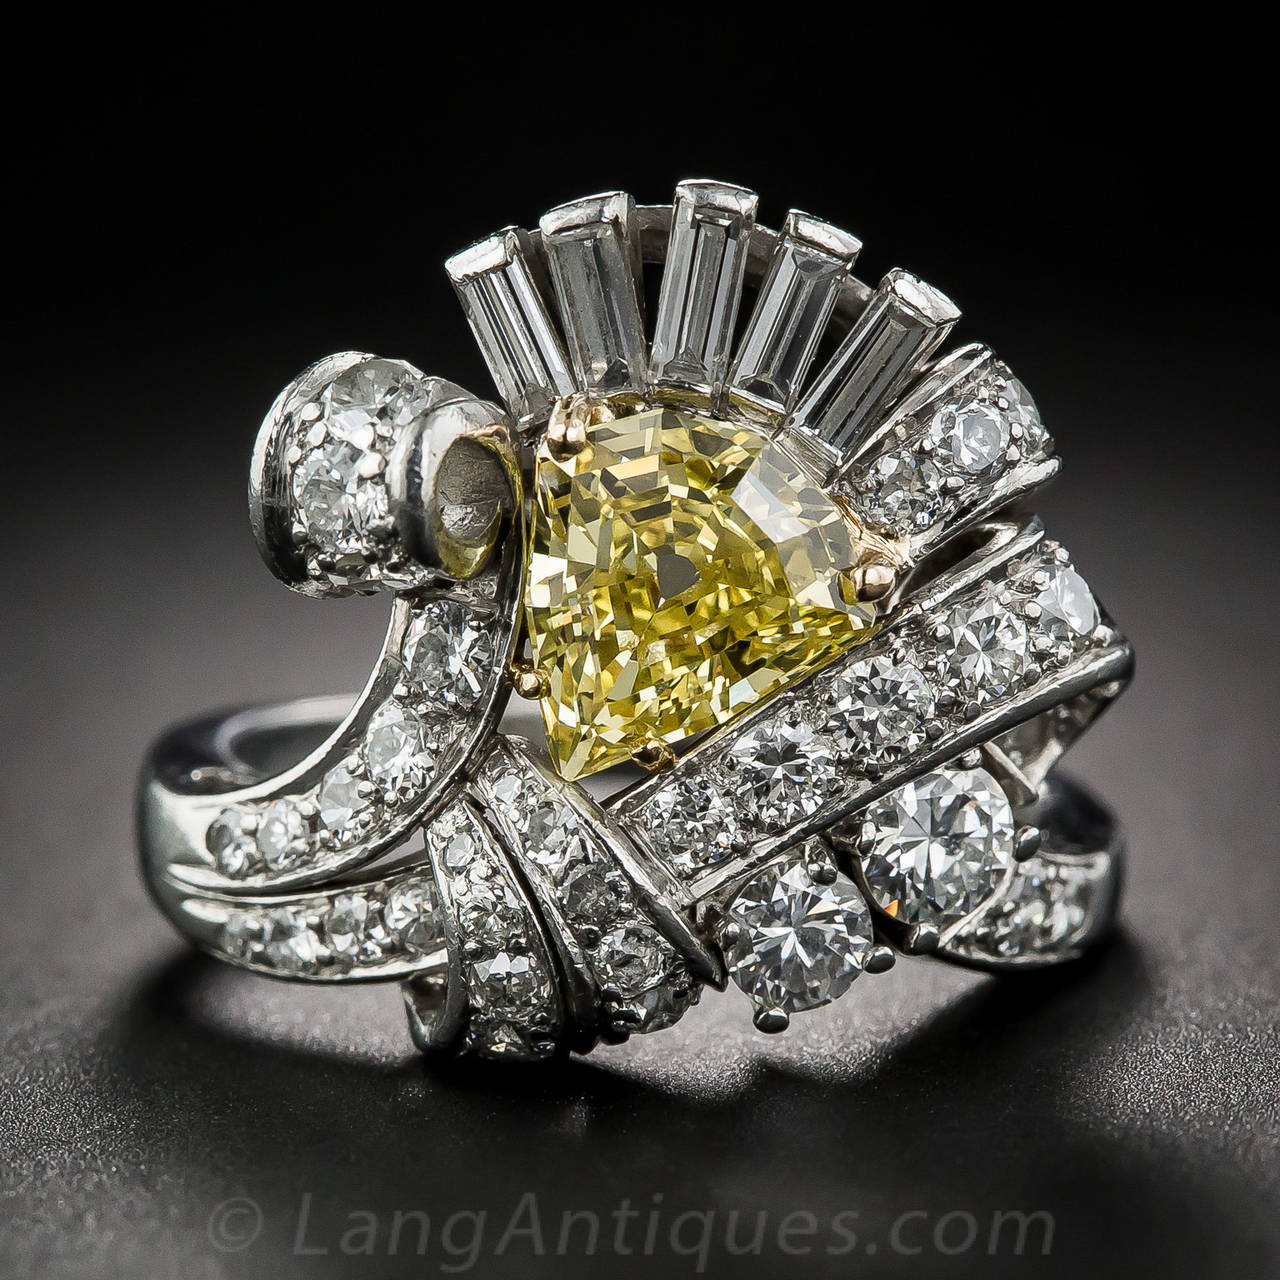 A truly singular and sensational late-Art Deco ring featuring an equally unique and stunning center stone. A fancy, canary yellow, step-cut shield shape diamond, weighing 1.53 carats and bearing a GIA Colored Diamond Grading Report stating: Natural